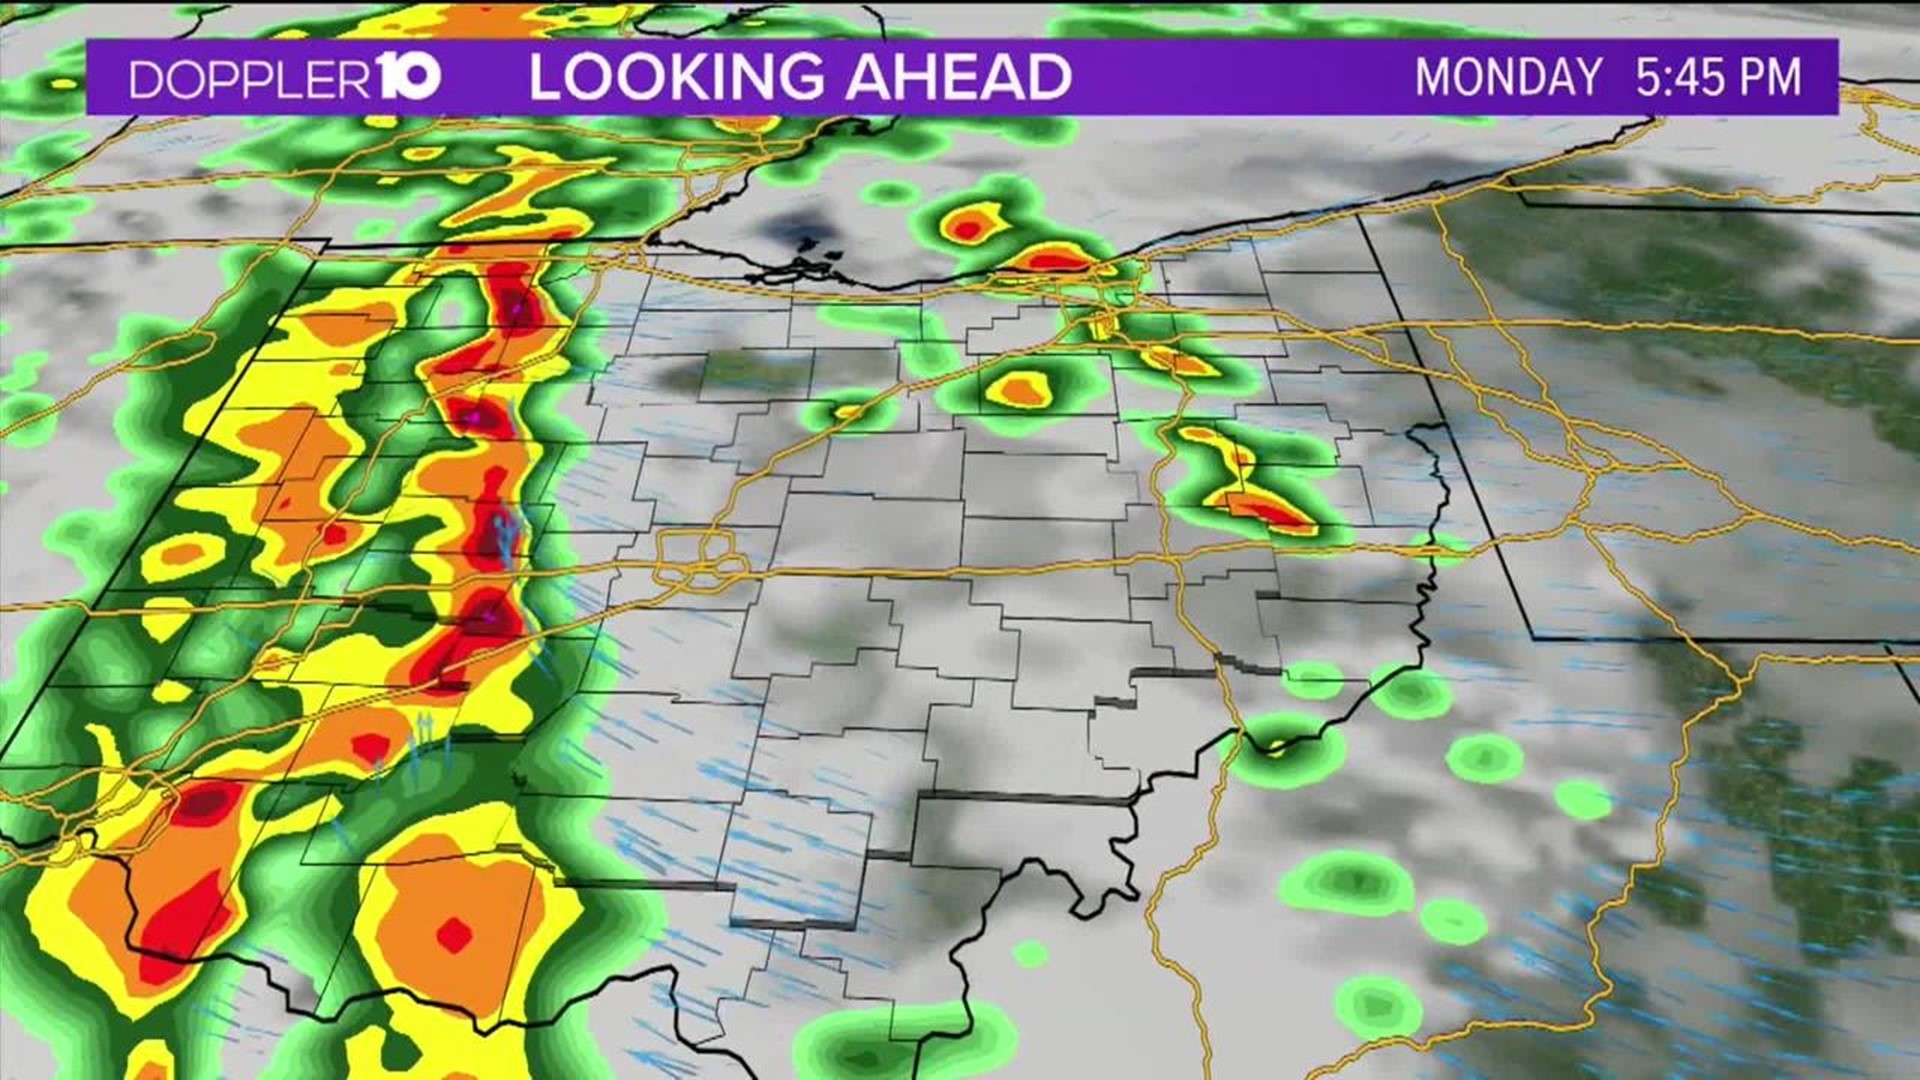 Tornado Watch issued for central Ohio canceled